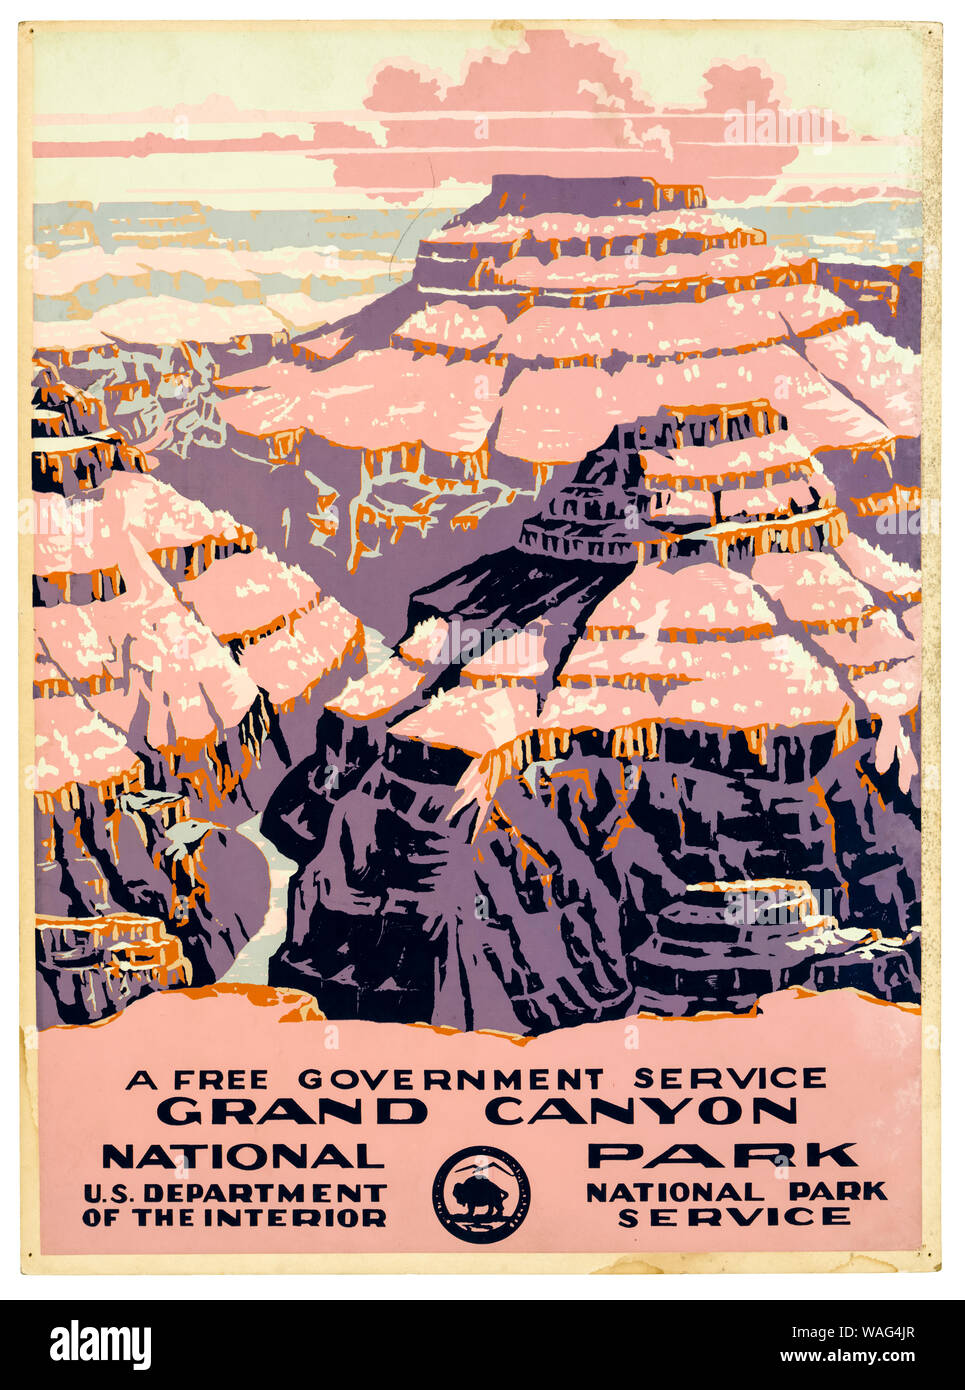 Vintage travel poster, Grand Canyon National Park, a free government service, poster, circa 1938, 1930s Stock Photo